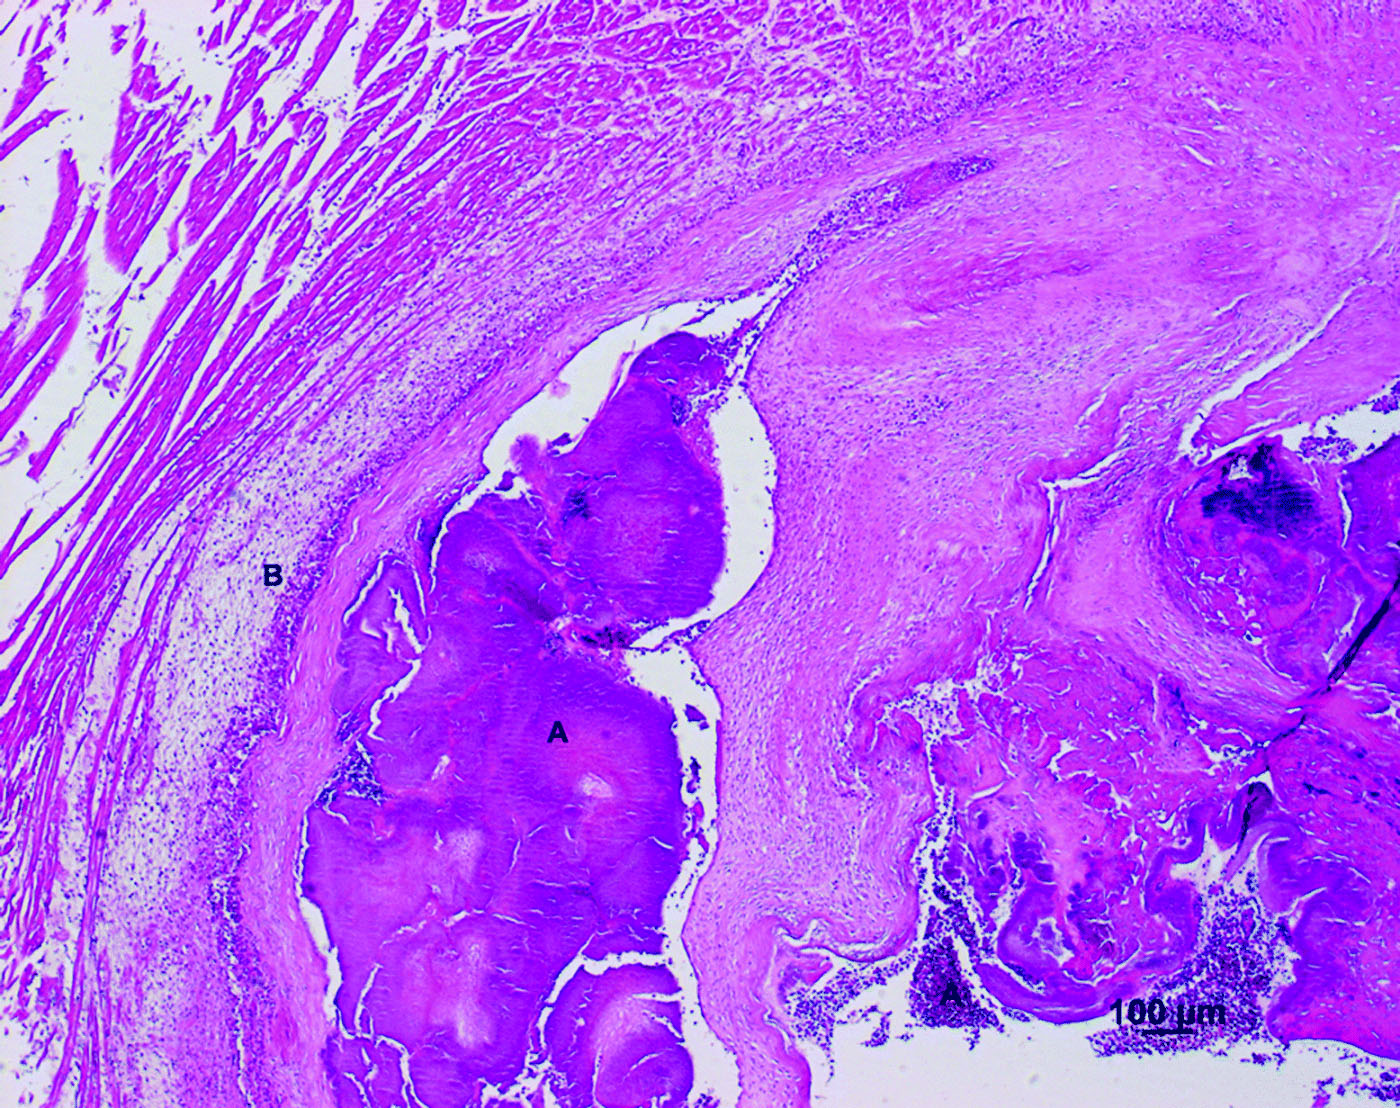 Figure 1.  Cross-section of the valvular region of the right ventricle of an Amazon parrot (A. autumnalis salvini) (haematoxylin and eosin stain). Note heterophils (B) infiltrating the thickened encocardium and bacterial colonization (A) throughout the heart lumen.